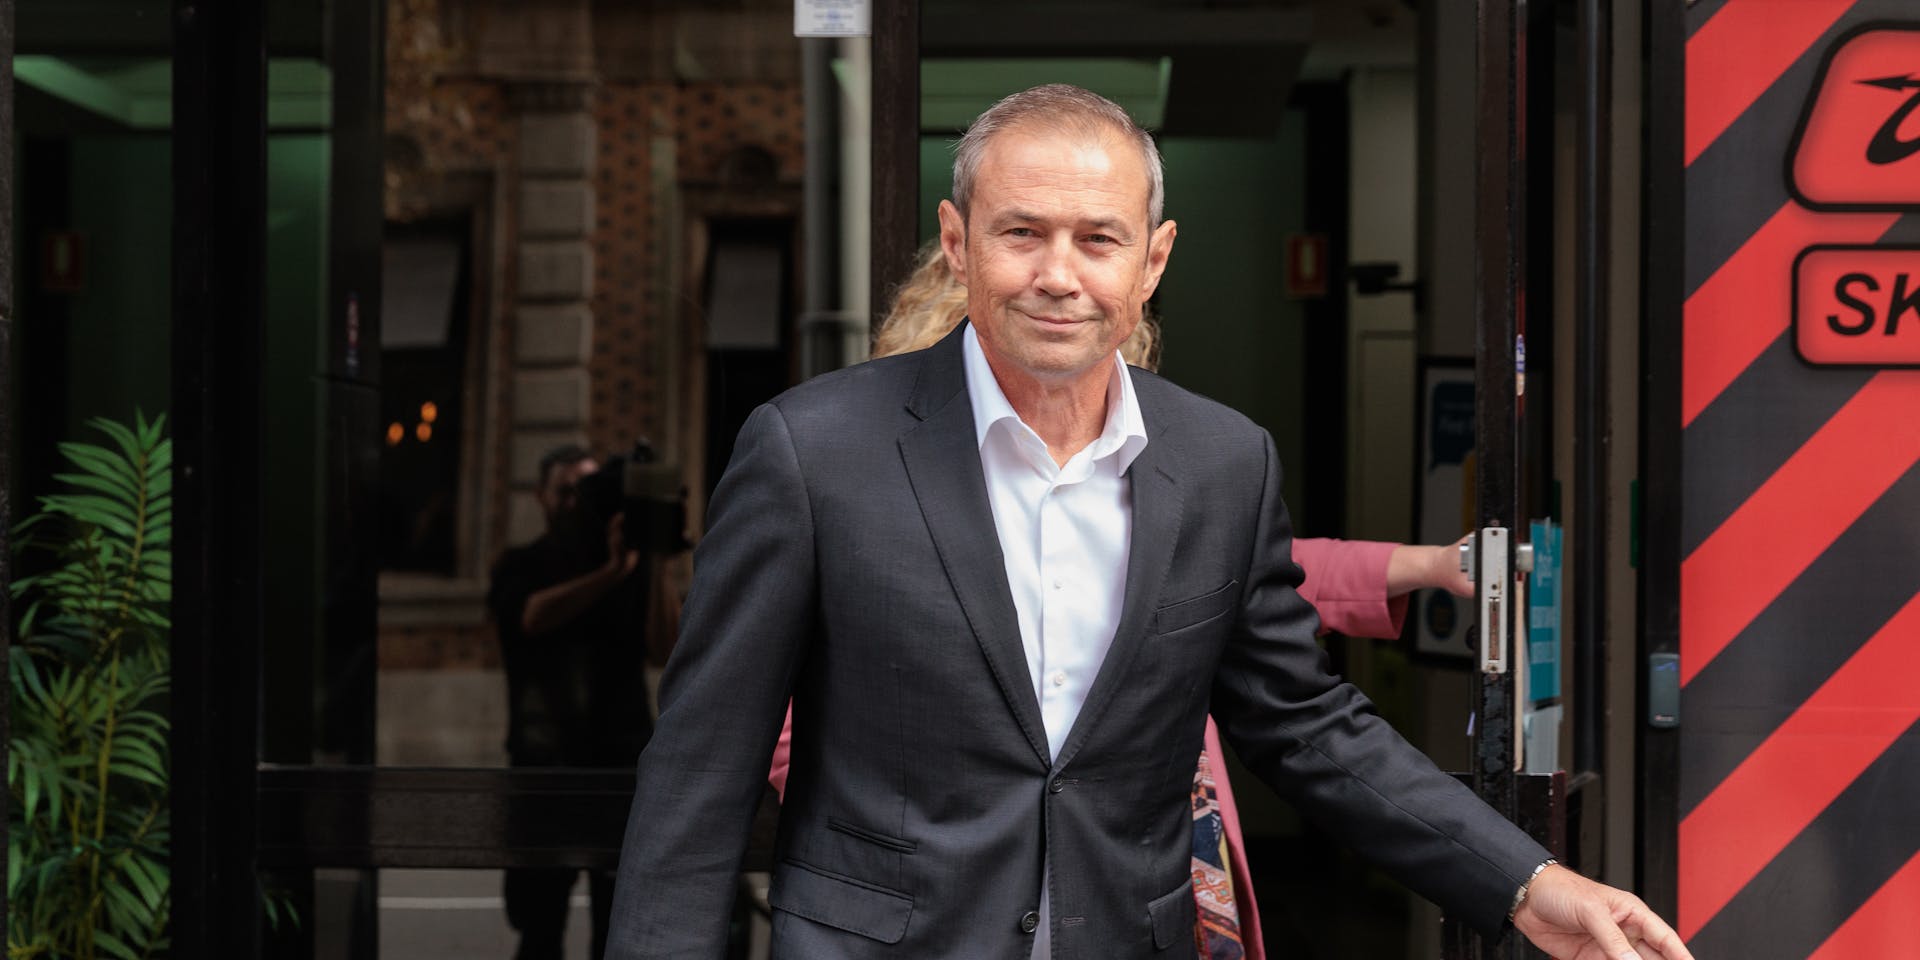 After 24 hours of drama, Roger Cook becomes the next premier of Western Australia